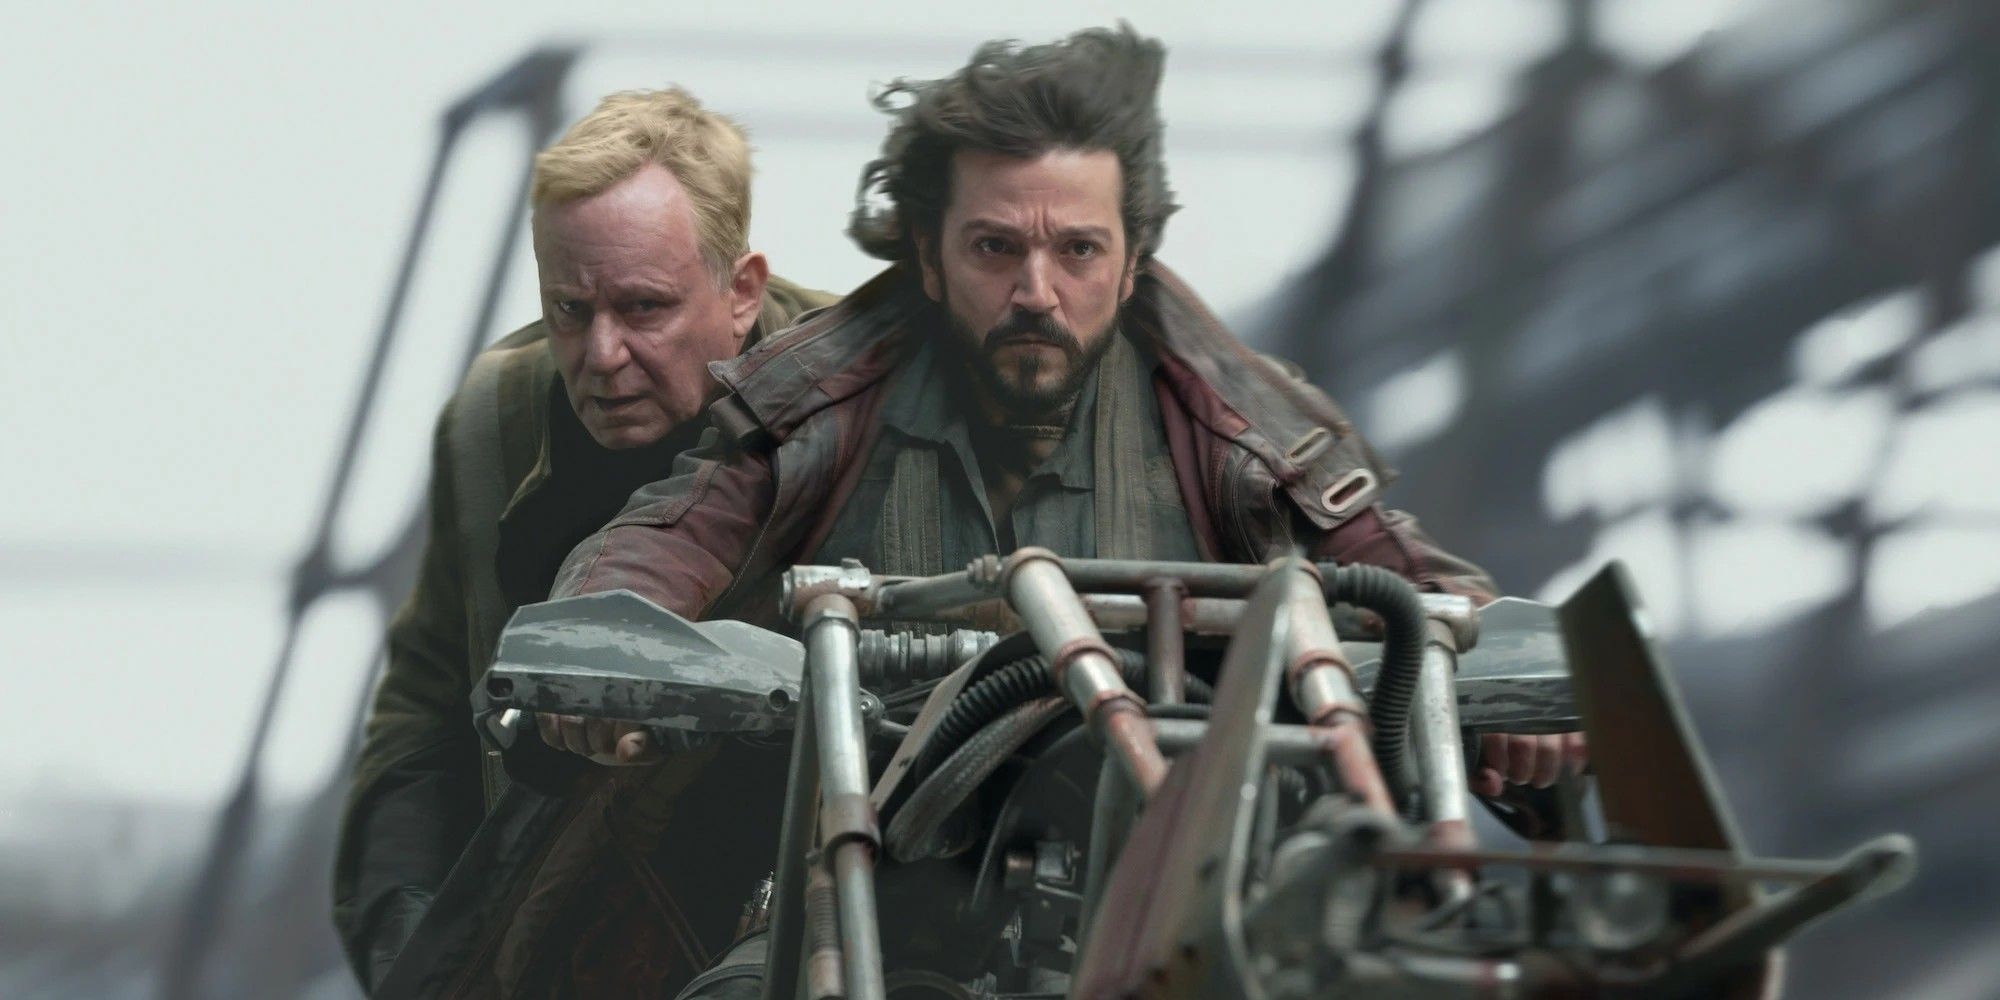 Cassian Andor and Luthen Rael riding on a bike in Andor